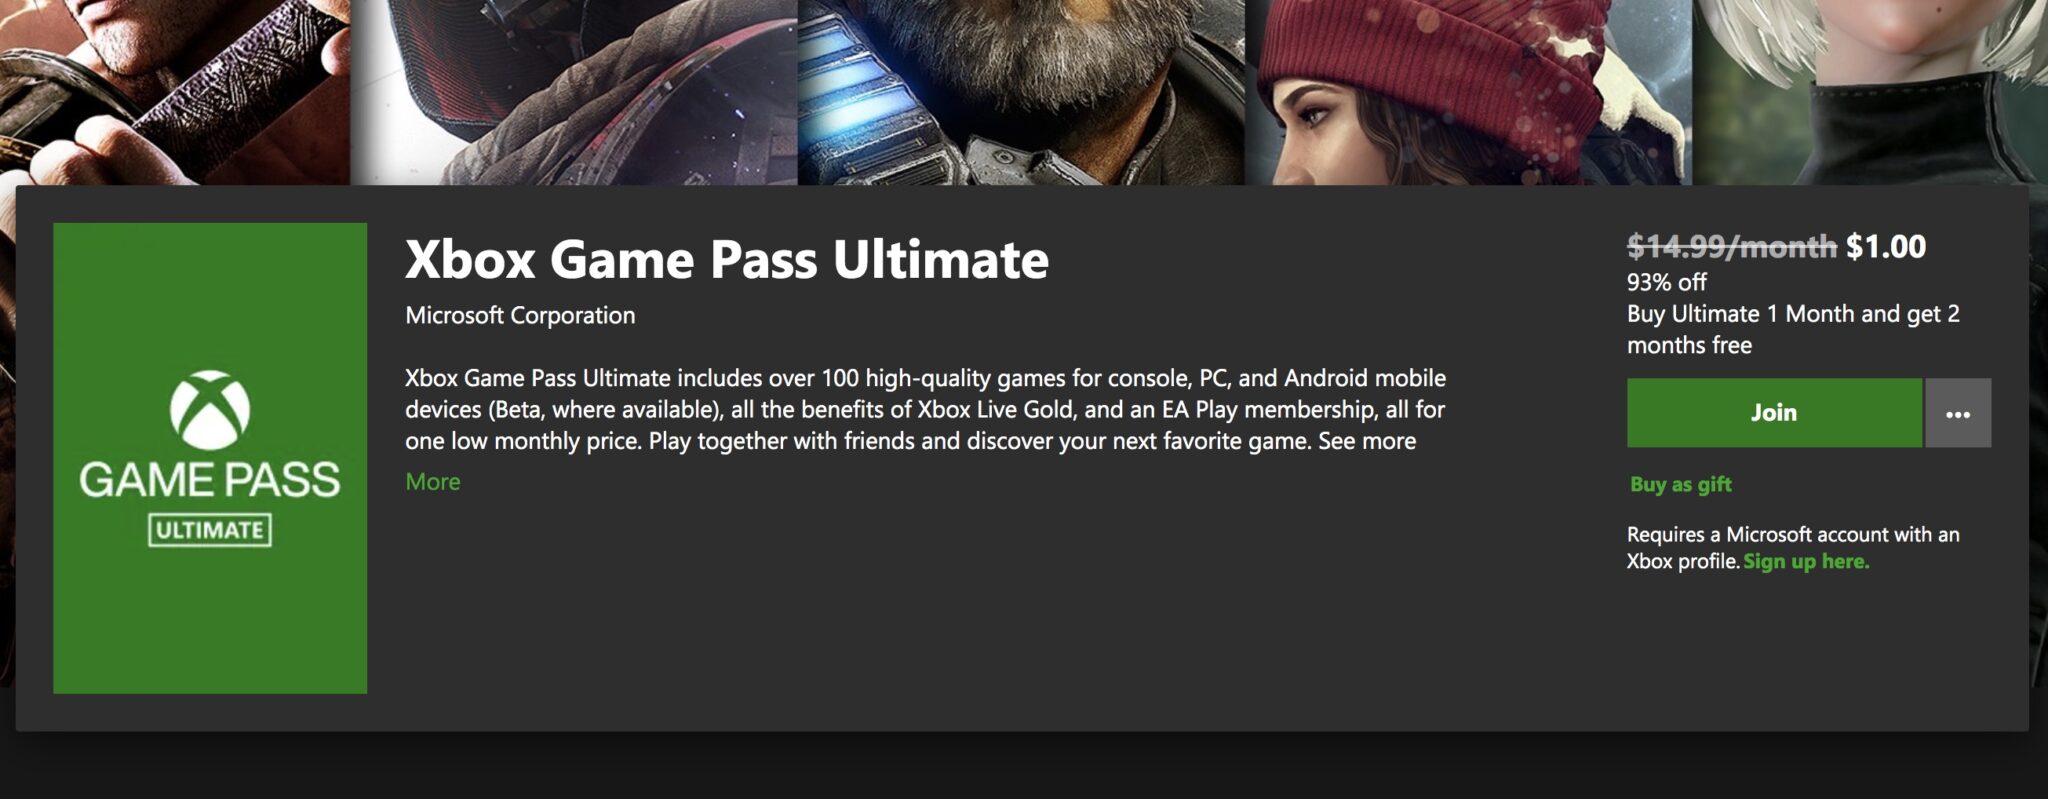 how to use xbox pc game pass